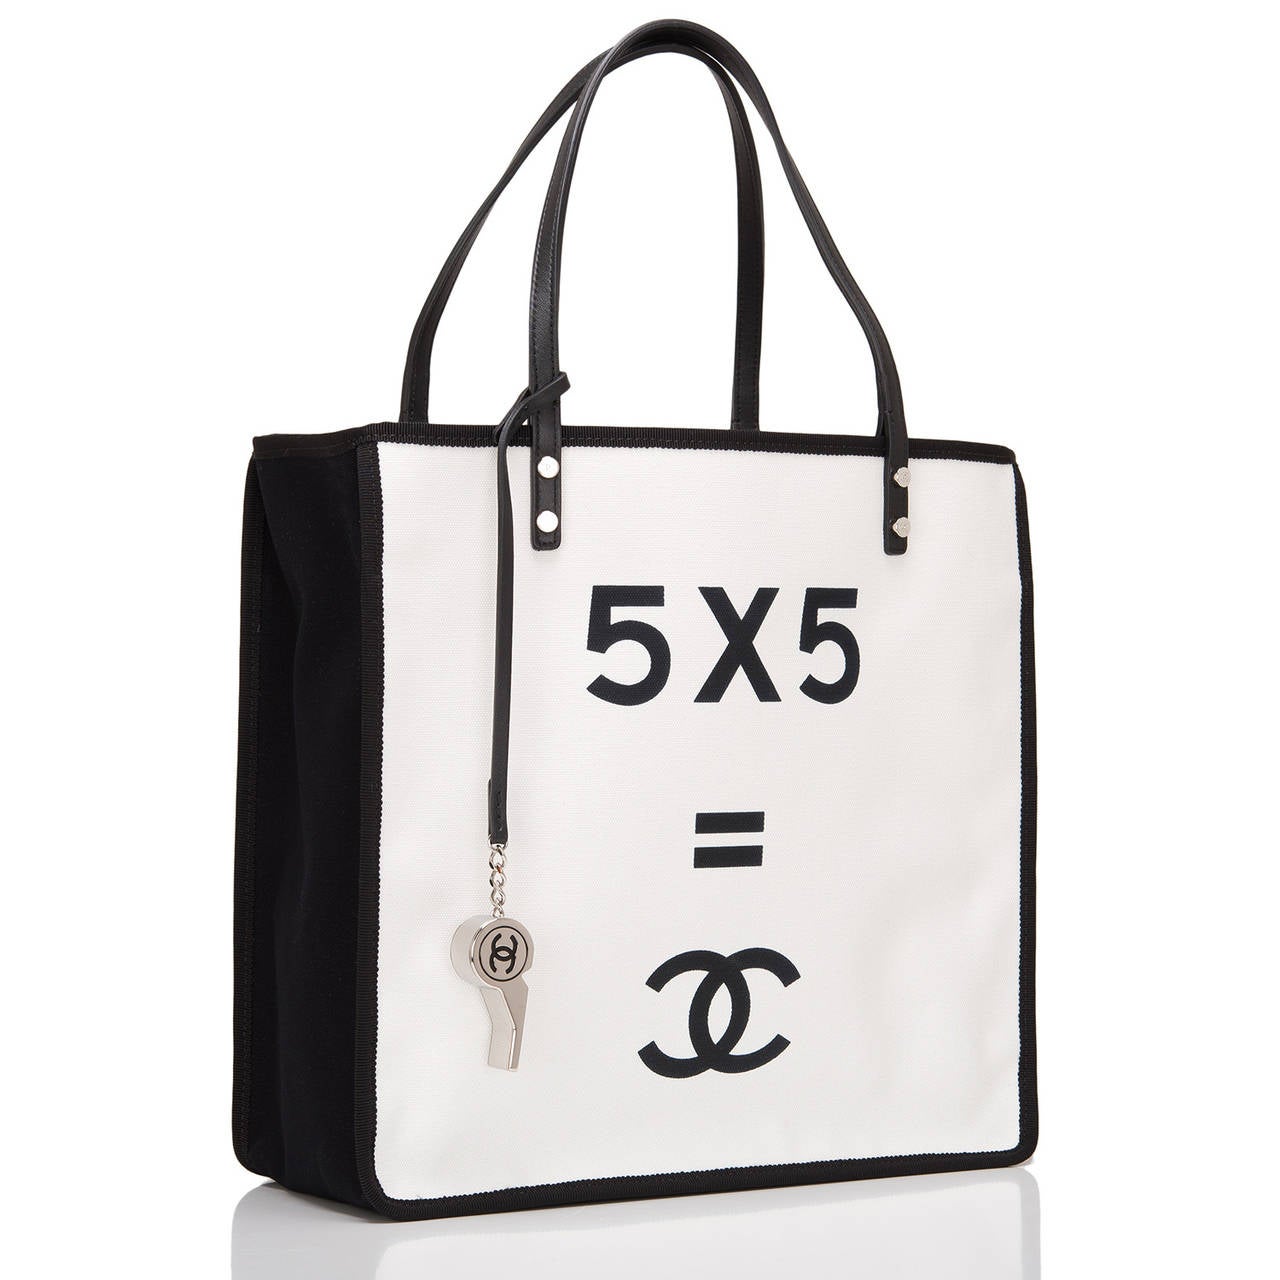 Chanel white canvas "5 x 5 = CC" white shopping tote with silver tone hardware.

This style features printed "5 x 5 = CC" demonstrate slogan at front, black canvas sides and double black leather straps.

The interior is lined